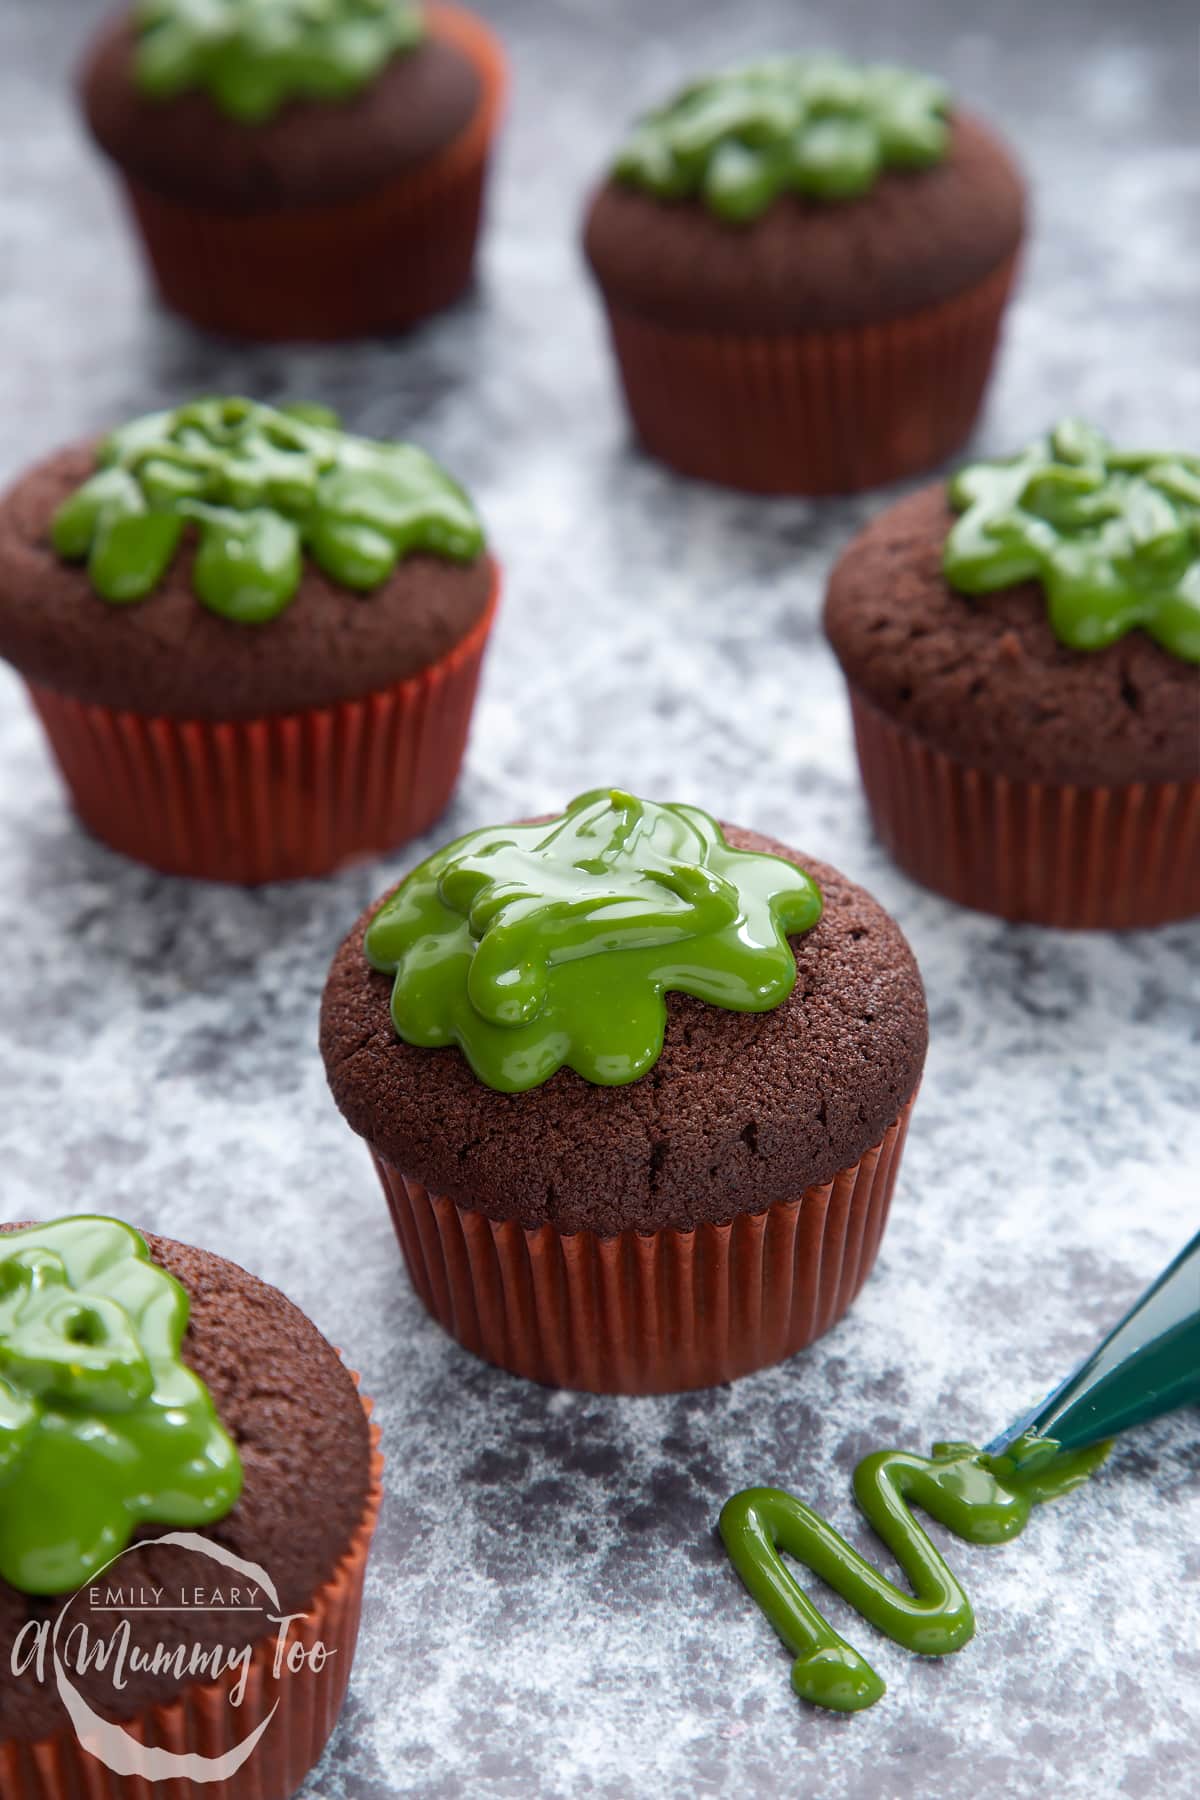 Slime cupcakes on a black backdrop. The cakes have a chocolate sponge topped with dyed-green caramel.